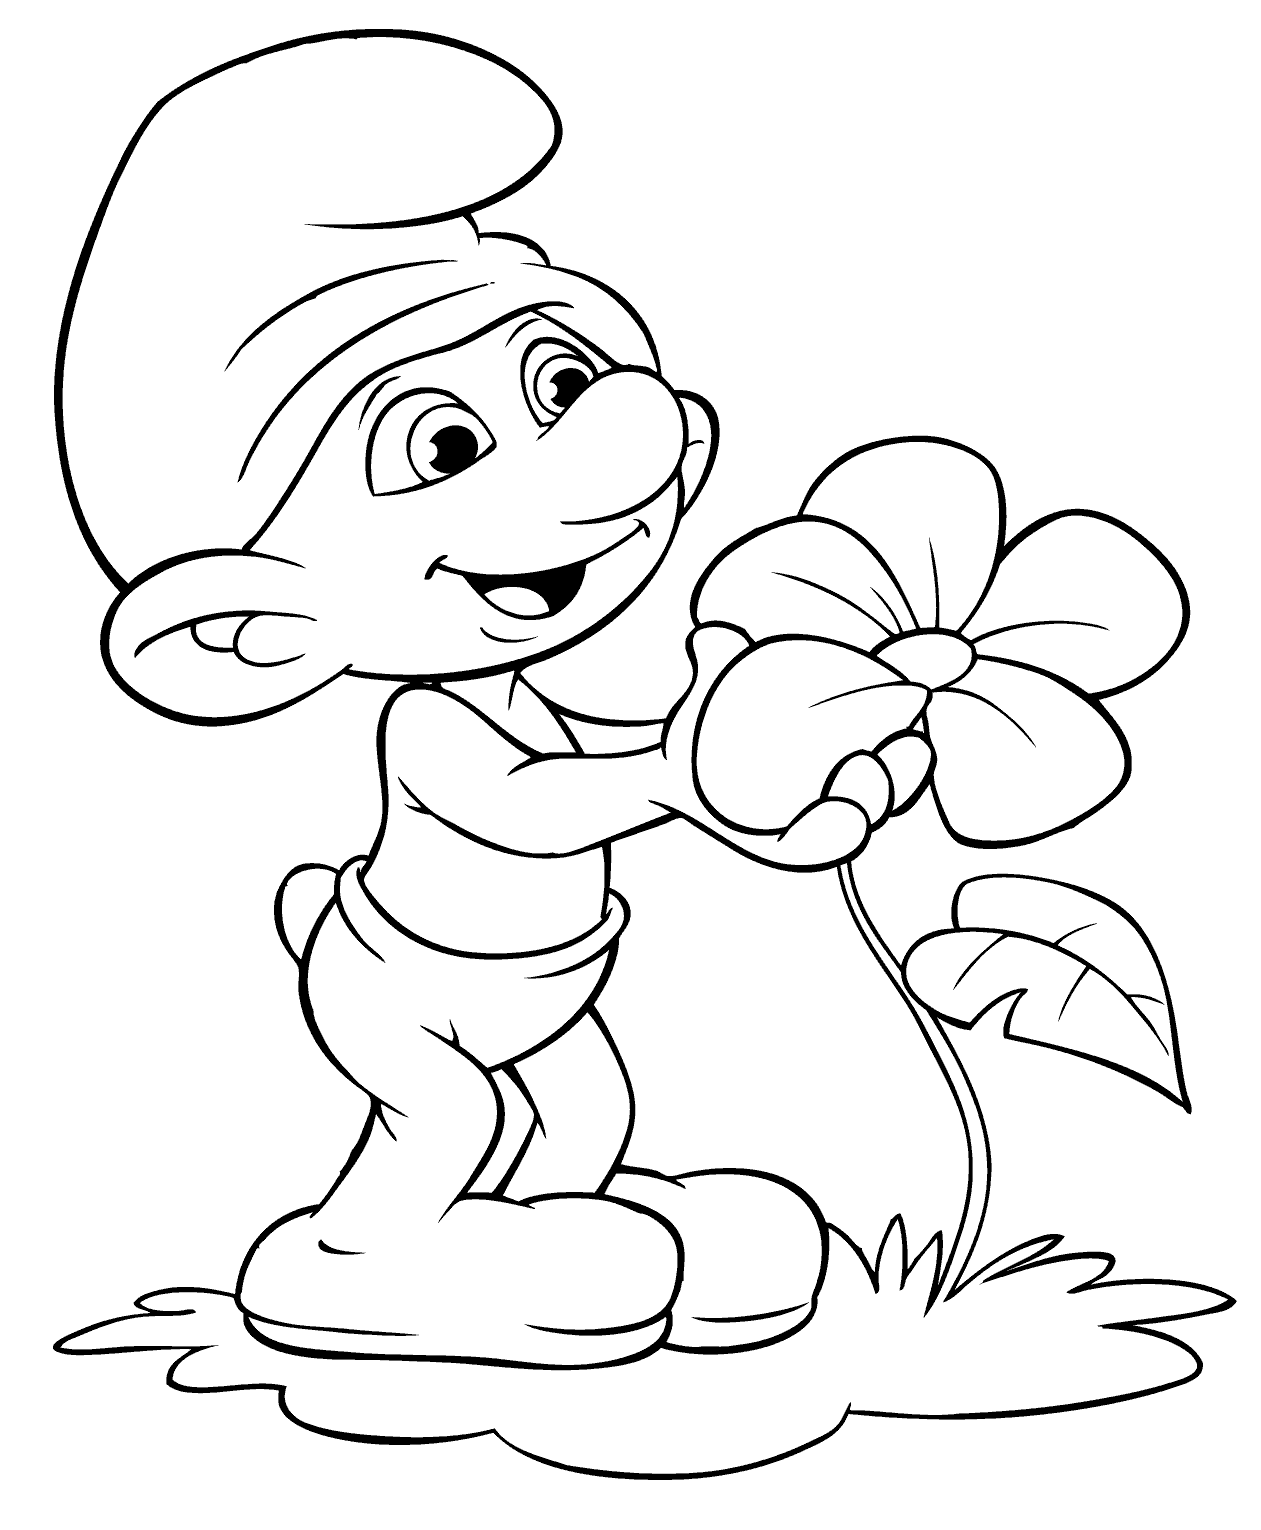 Clumsy Smurf with Flower Coloring Page